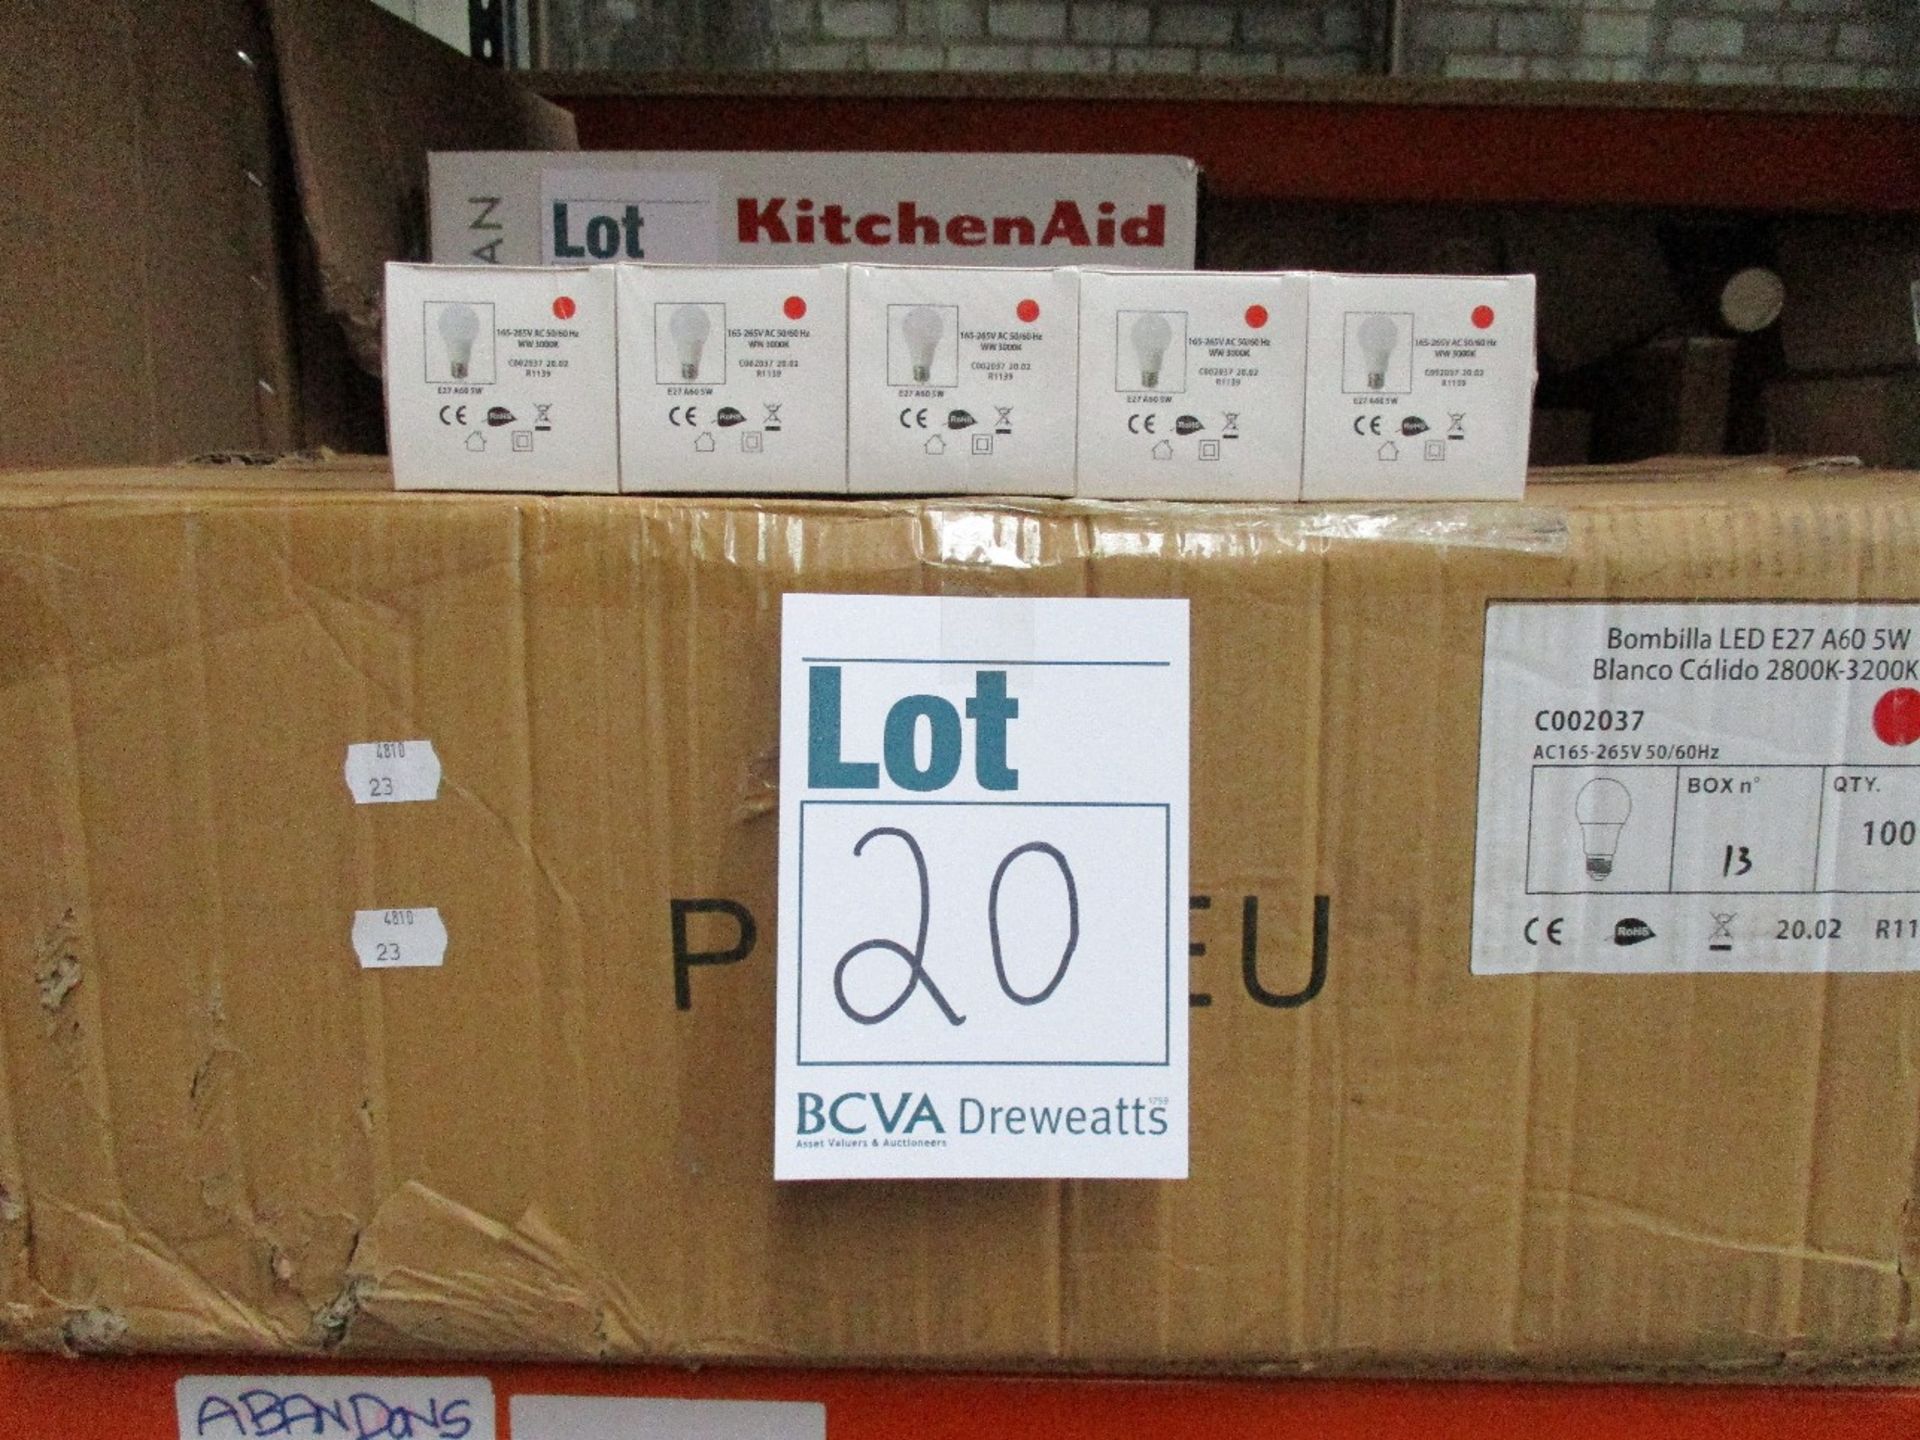 A quantity of Bombilla LED E27 A60 5W screw in light bulbs (Approximately 100 items).